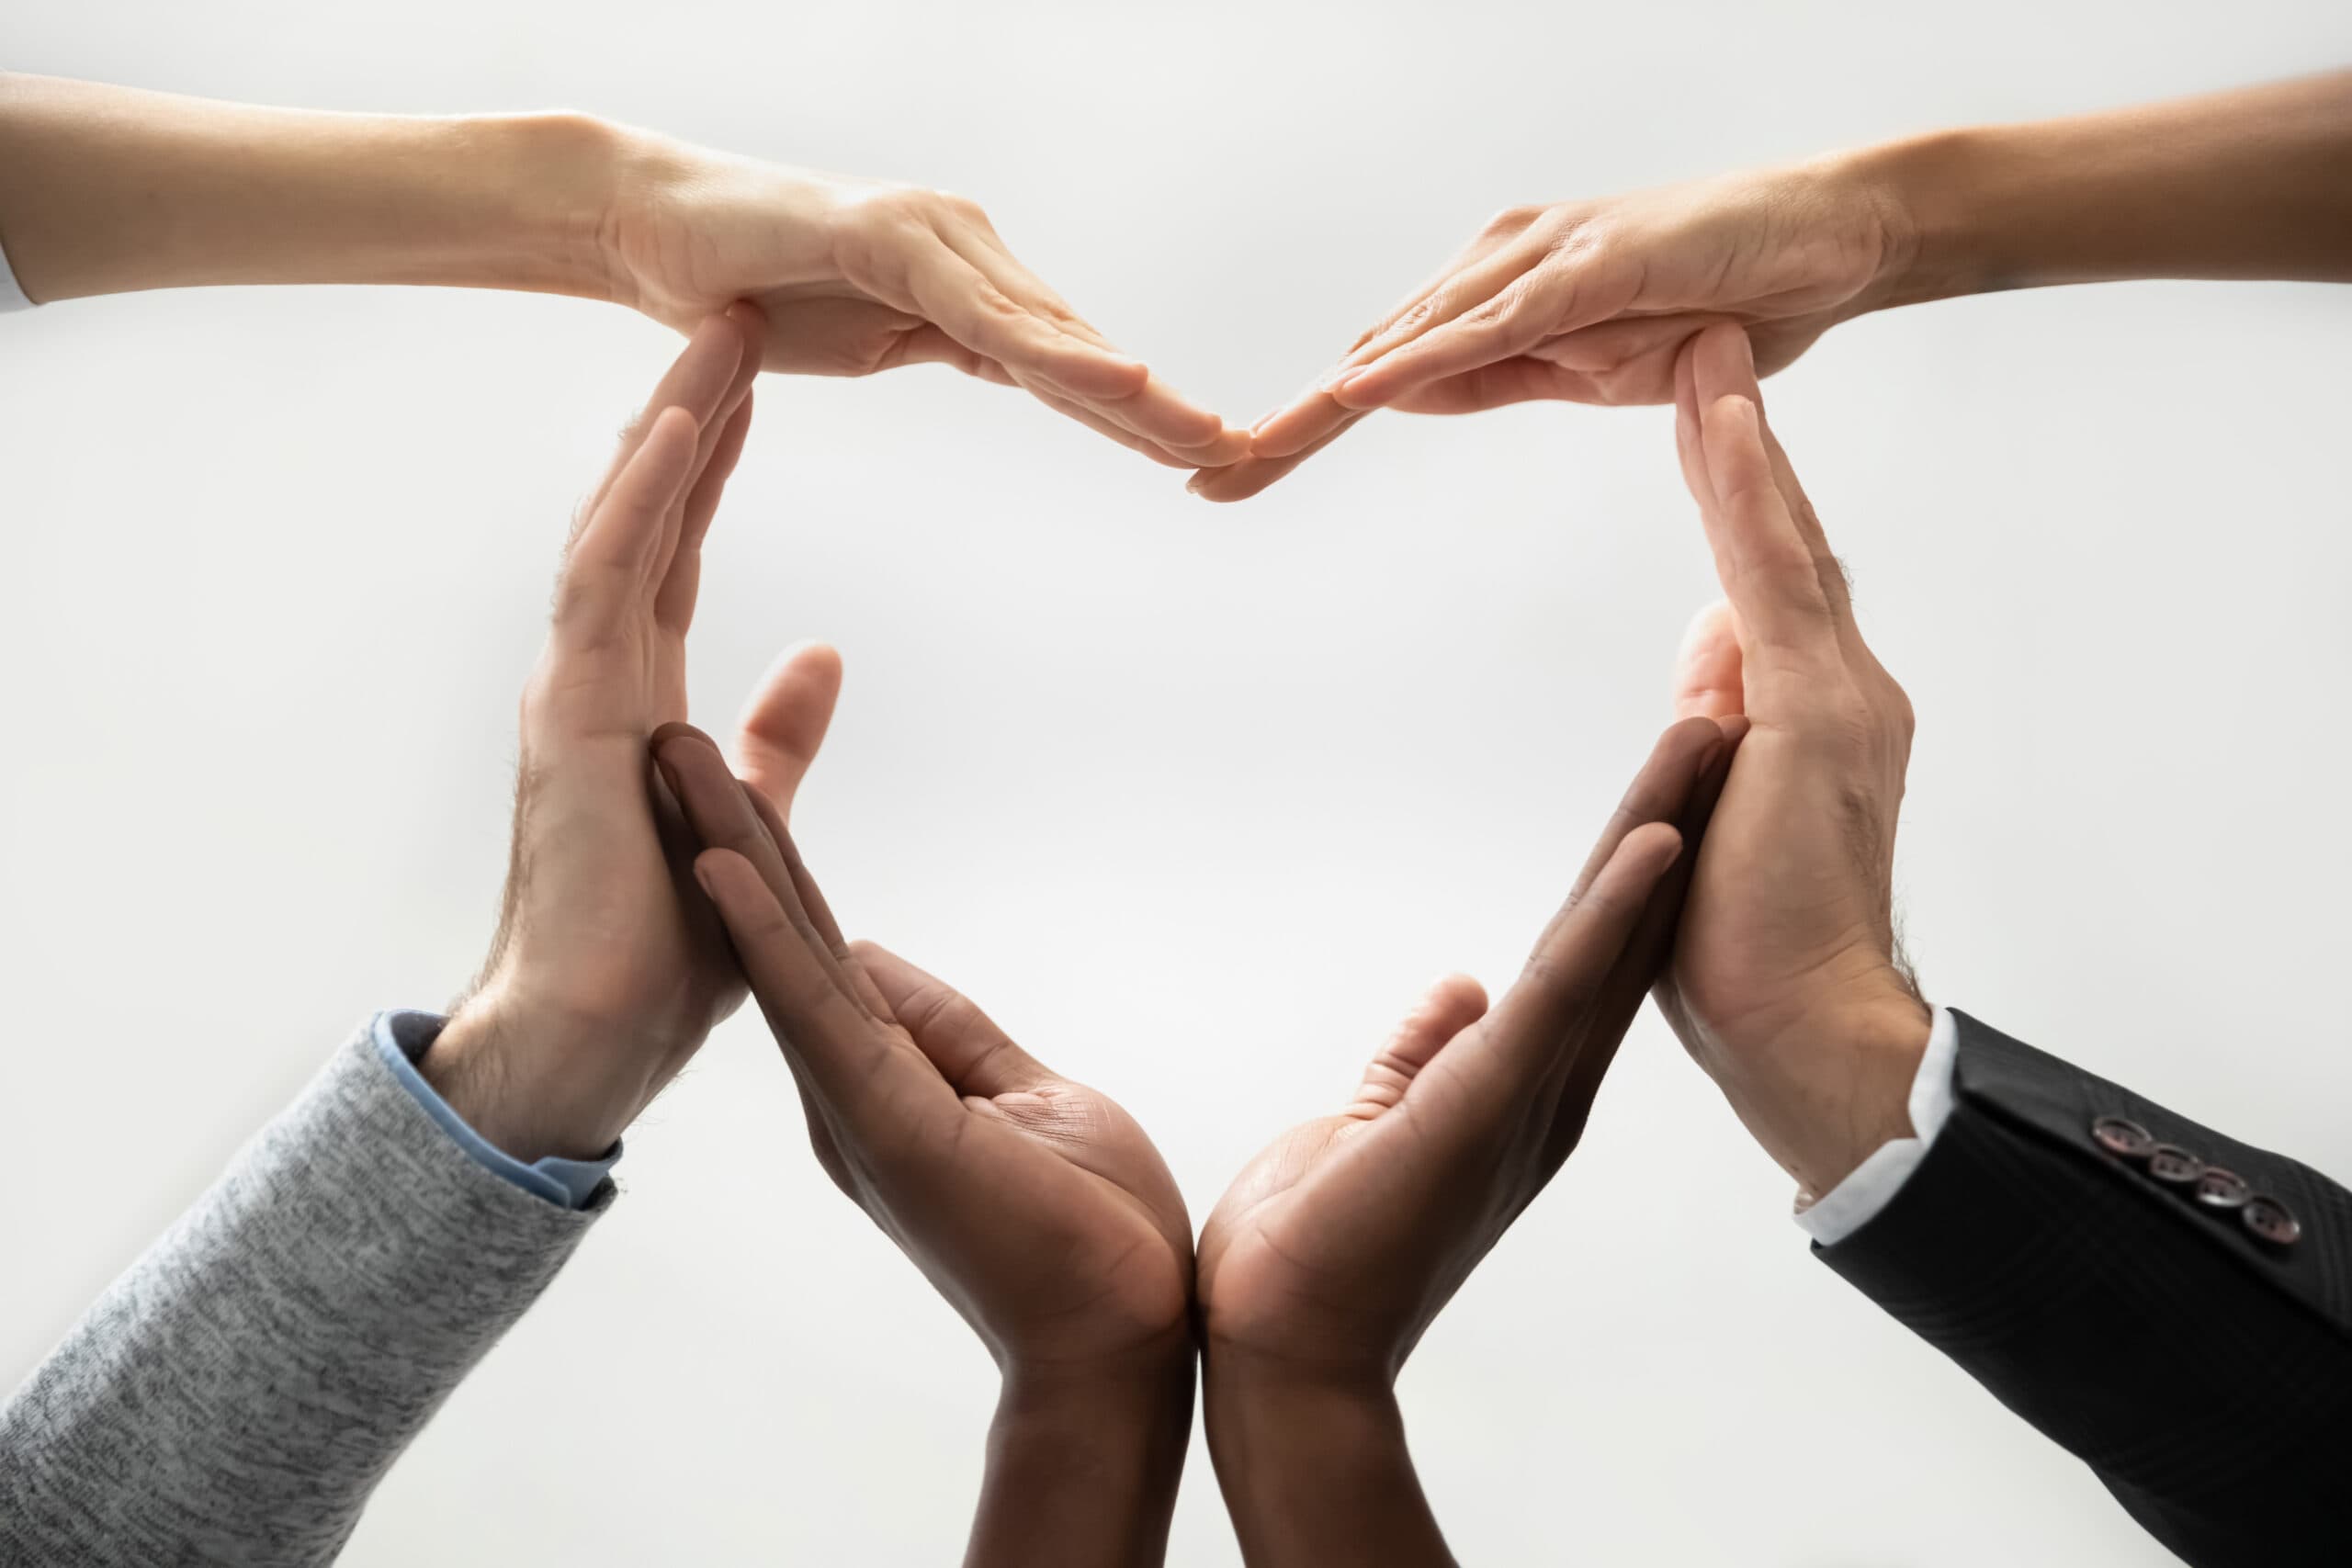 A group of hands forming a heart shape